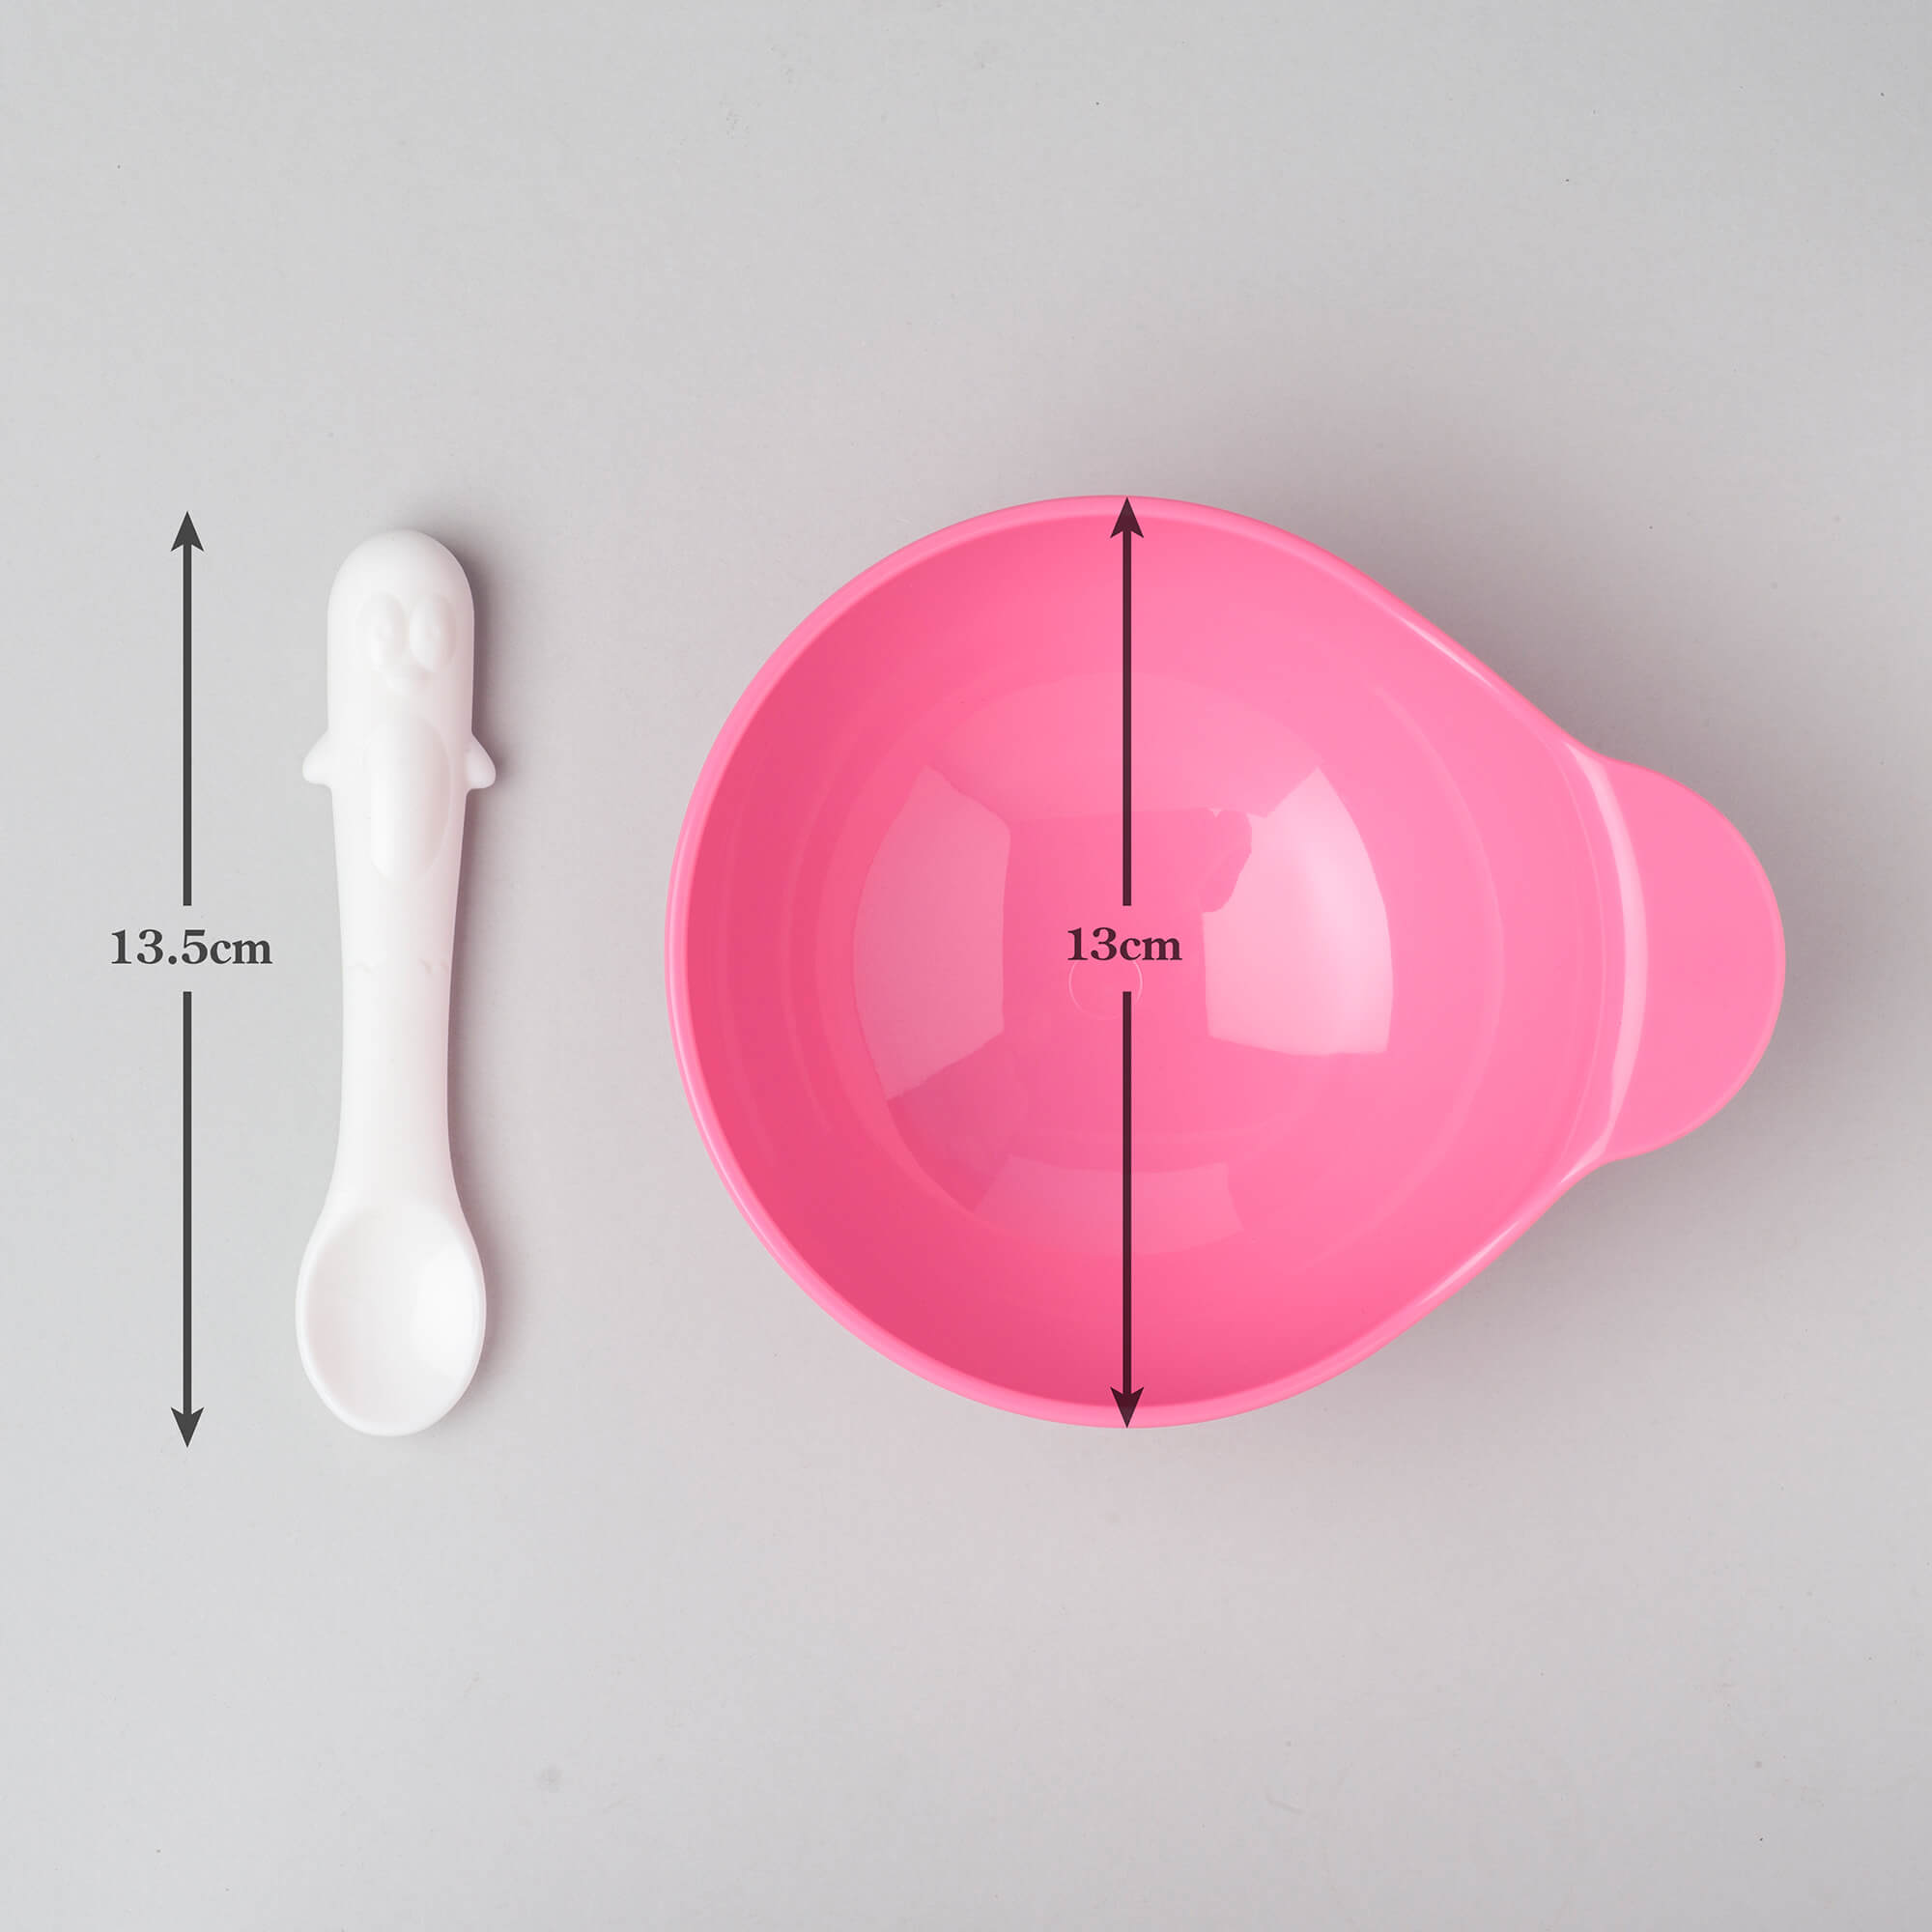 Zeal Silicone Baby Bowl and Spoon Set dimensions